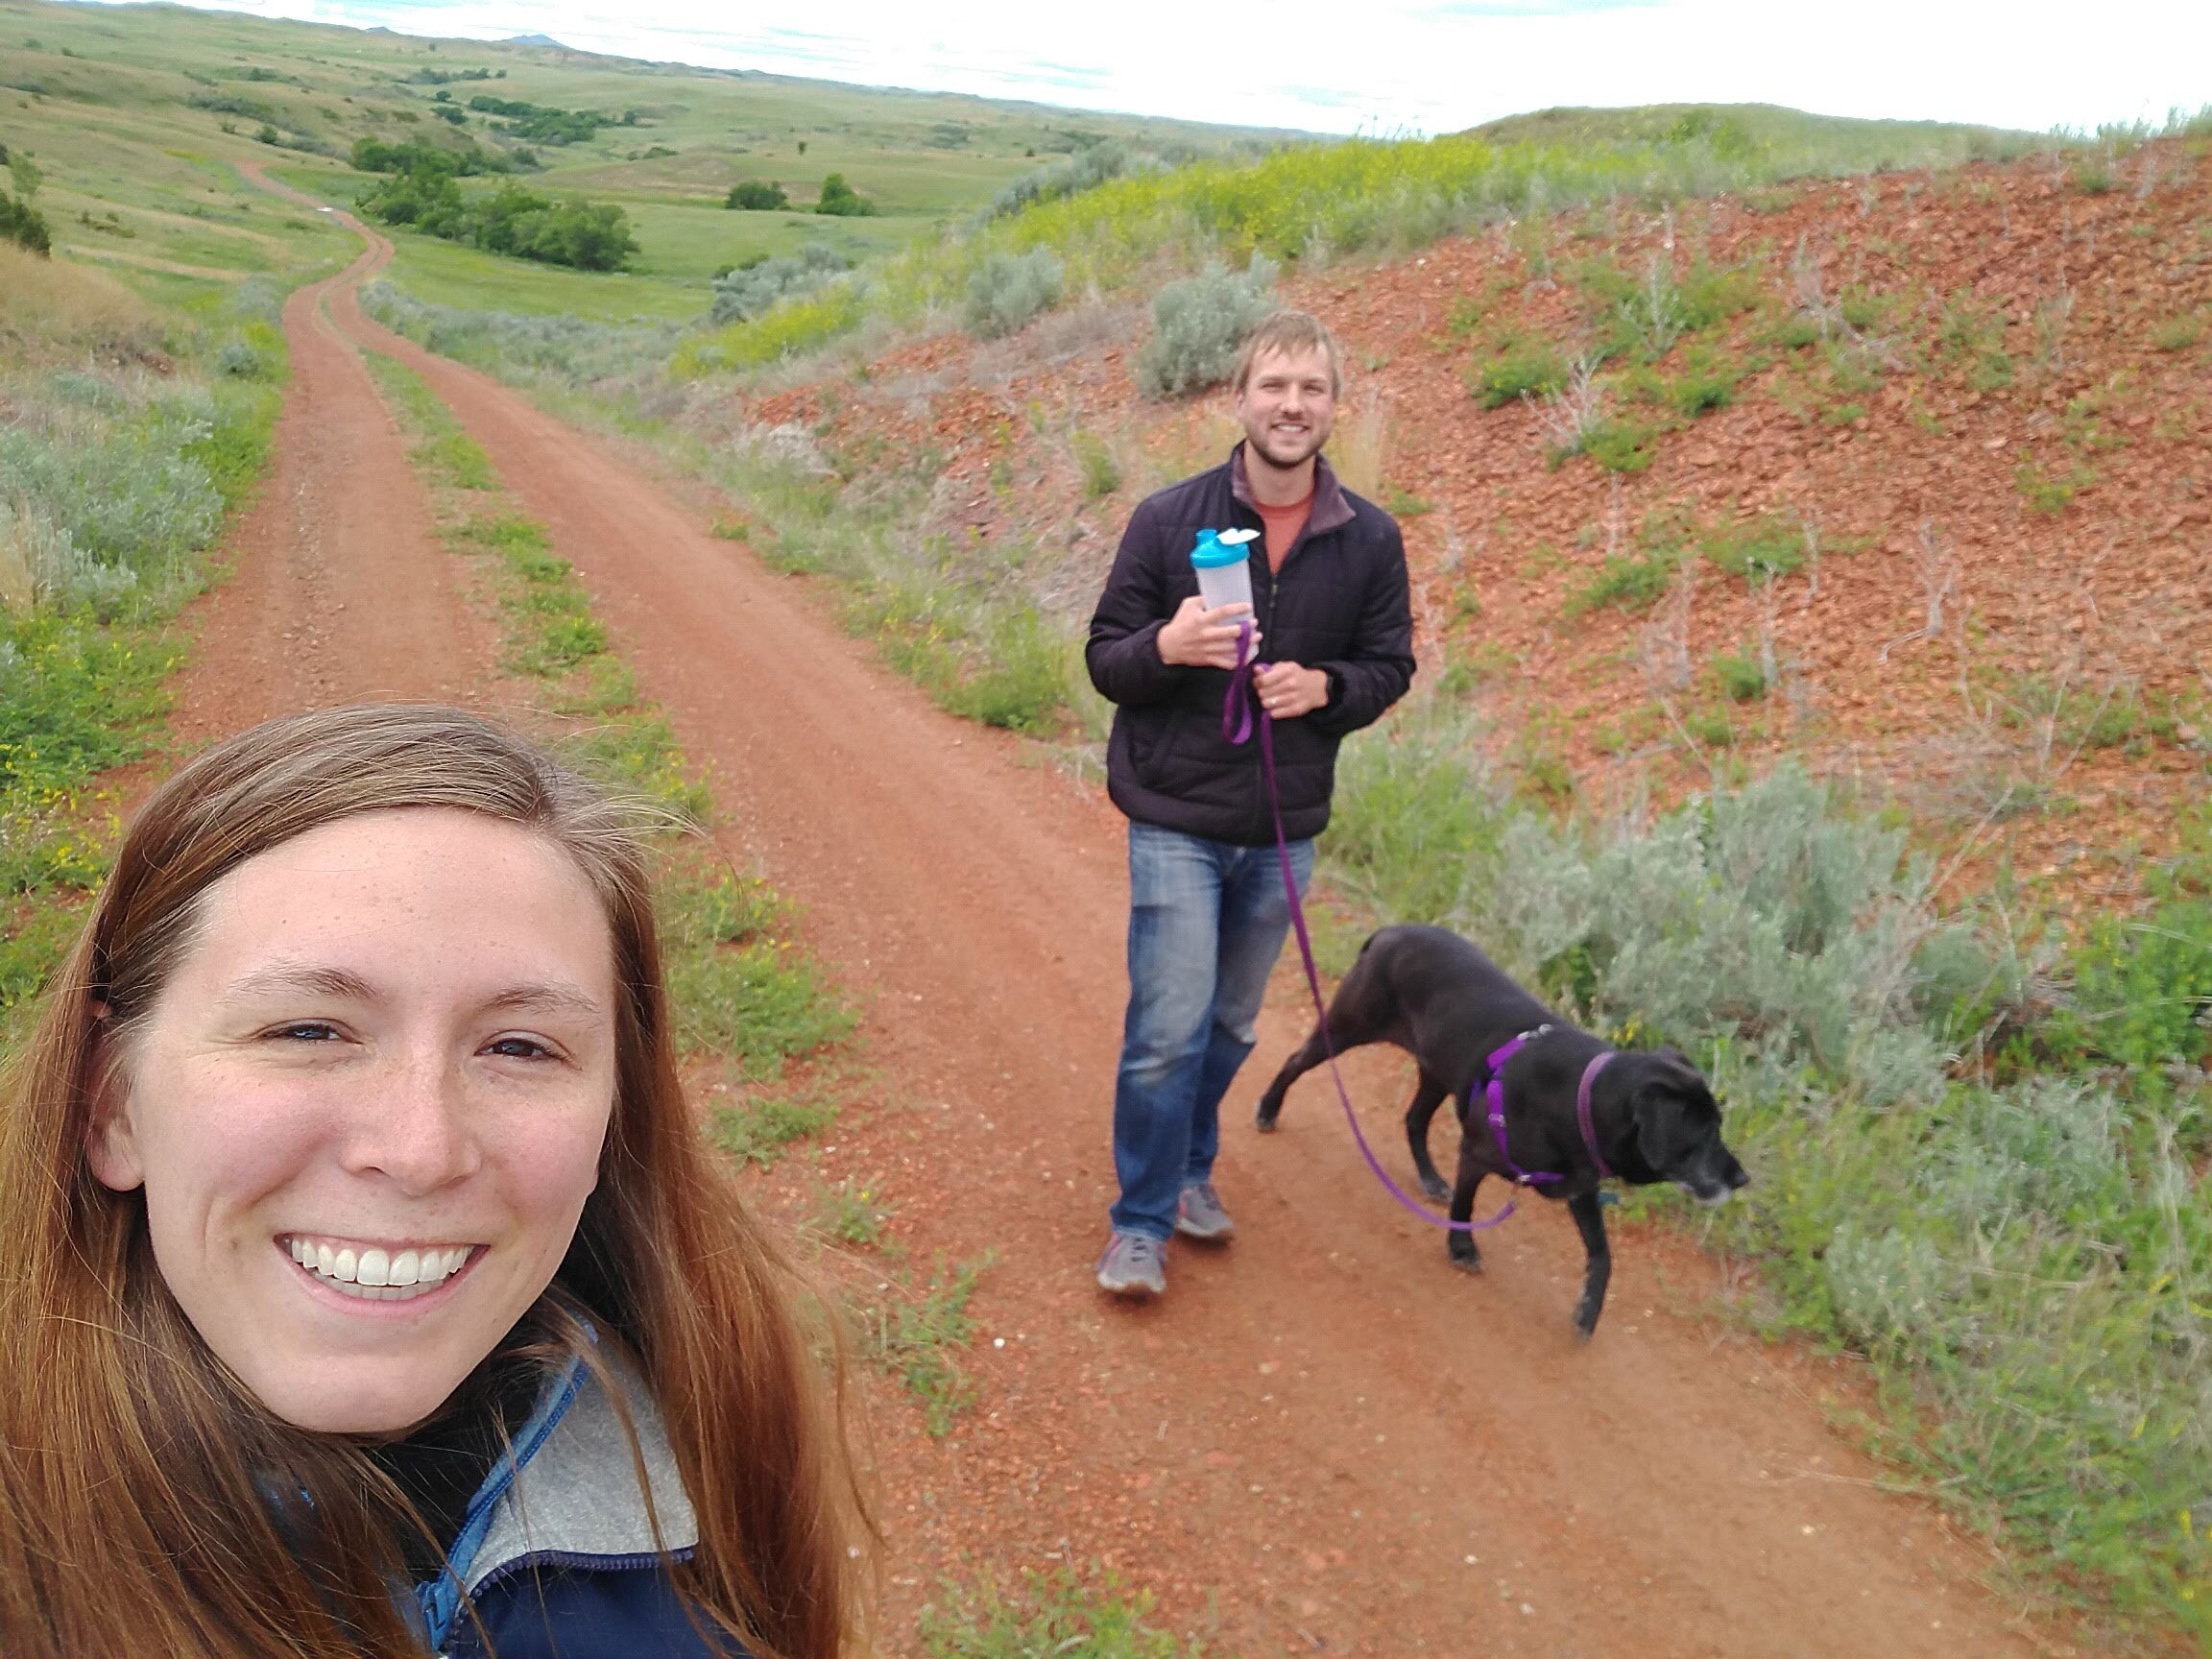 On our way to check out our exit route out of our BLM spot. There was rain and some deep ruts, but we made it!.jpg